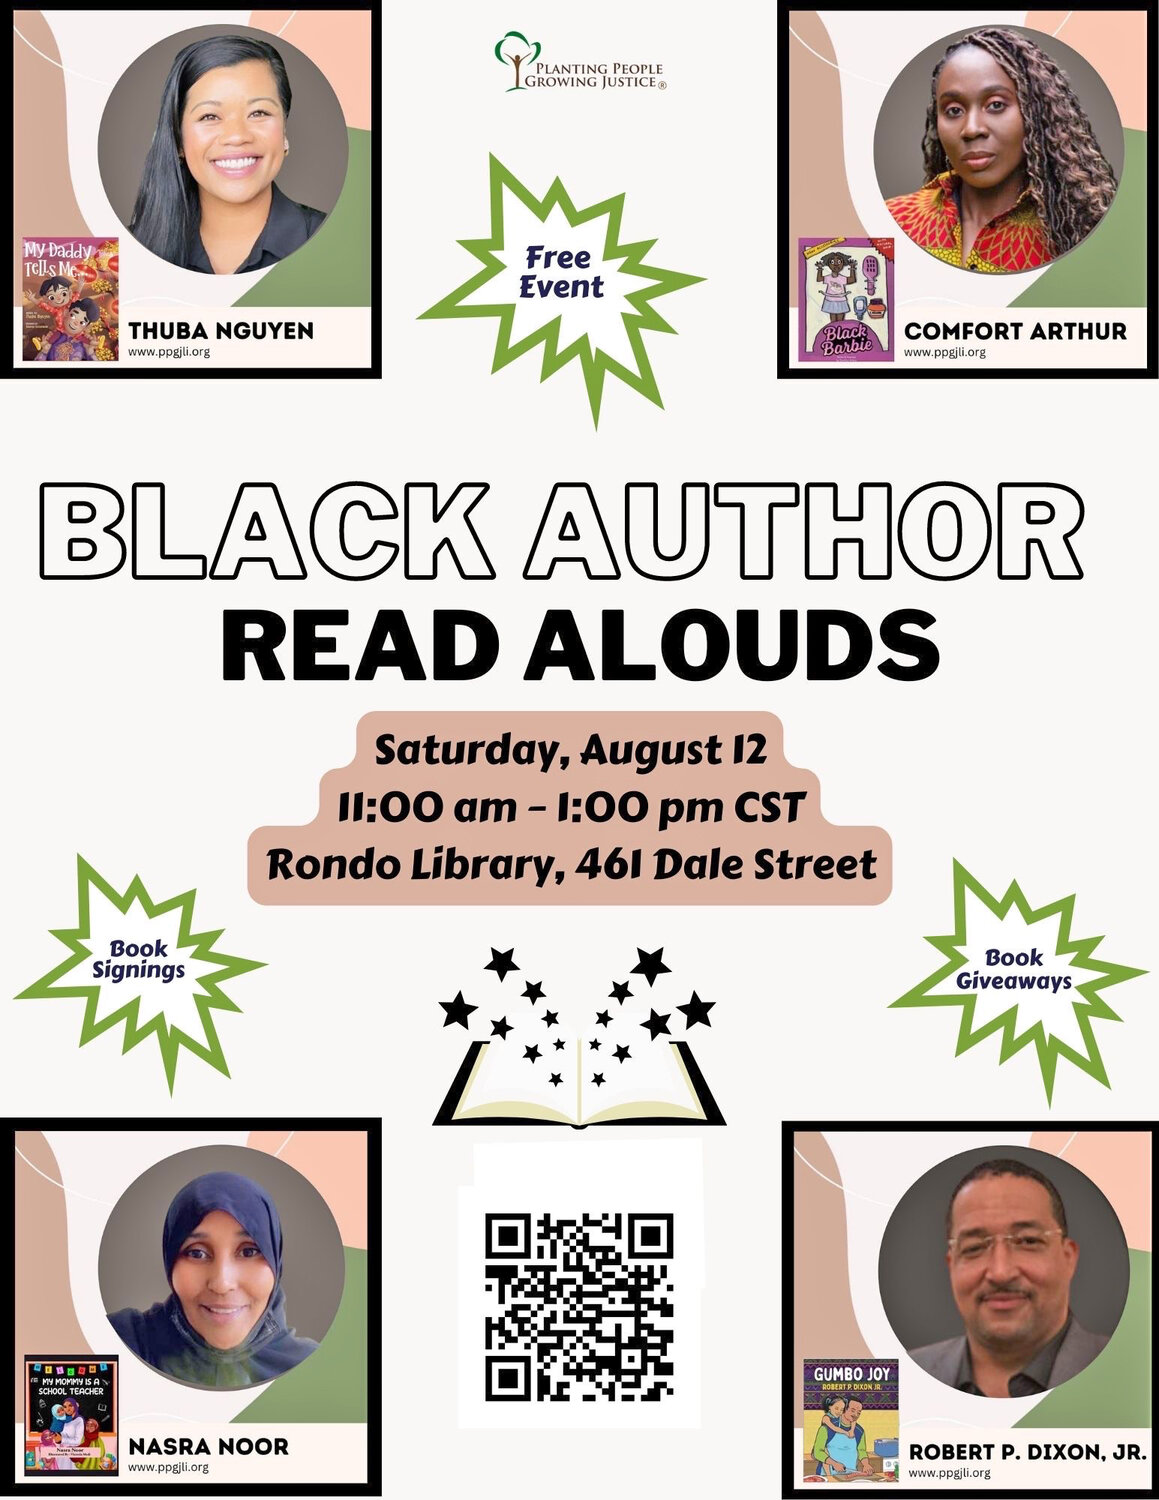 Stop by to hear these authors on Saturday, Aug. 12 from 11 a.m. to 1 p.m. at the Rondo Library (461 Dale St.) during the Black Author Read Alouds. There will be book giveaways and book signings.